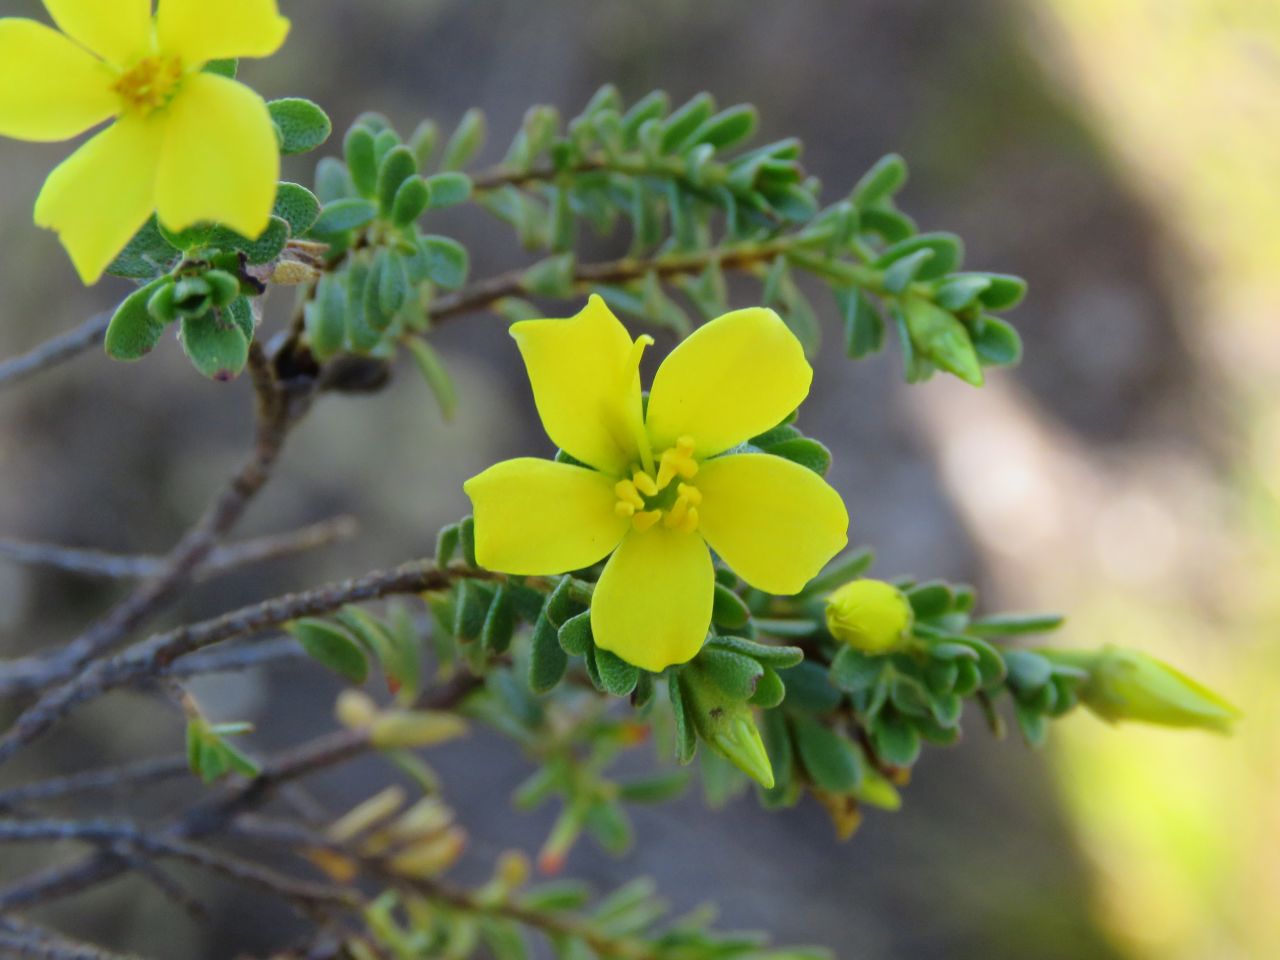 Almeda and Pacifico also found this yellow flowering shrub, named Microlicia prostrata, blooming in the region.